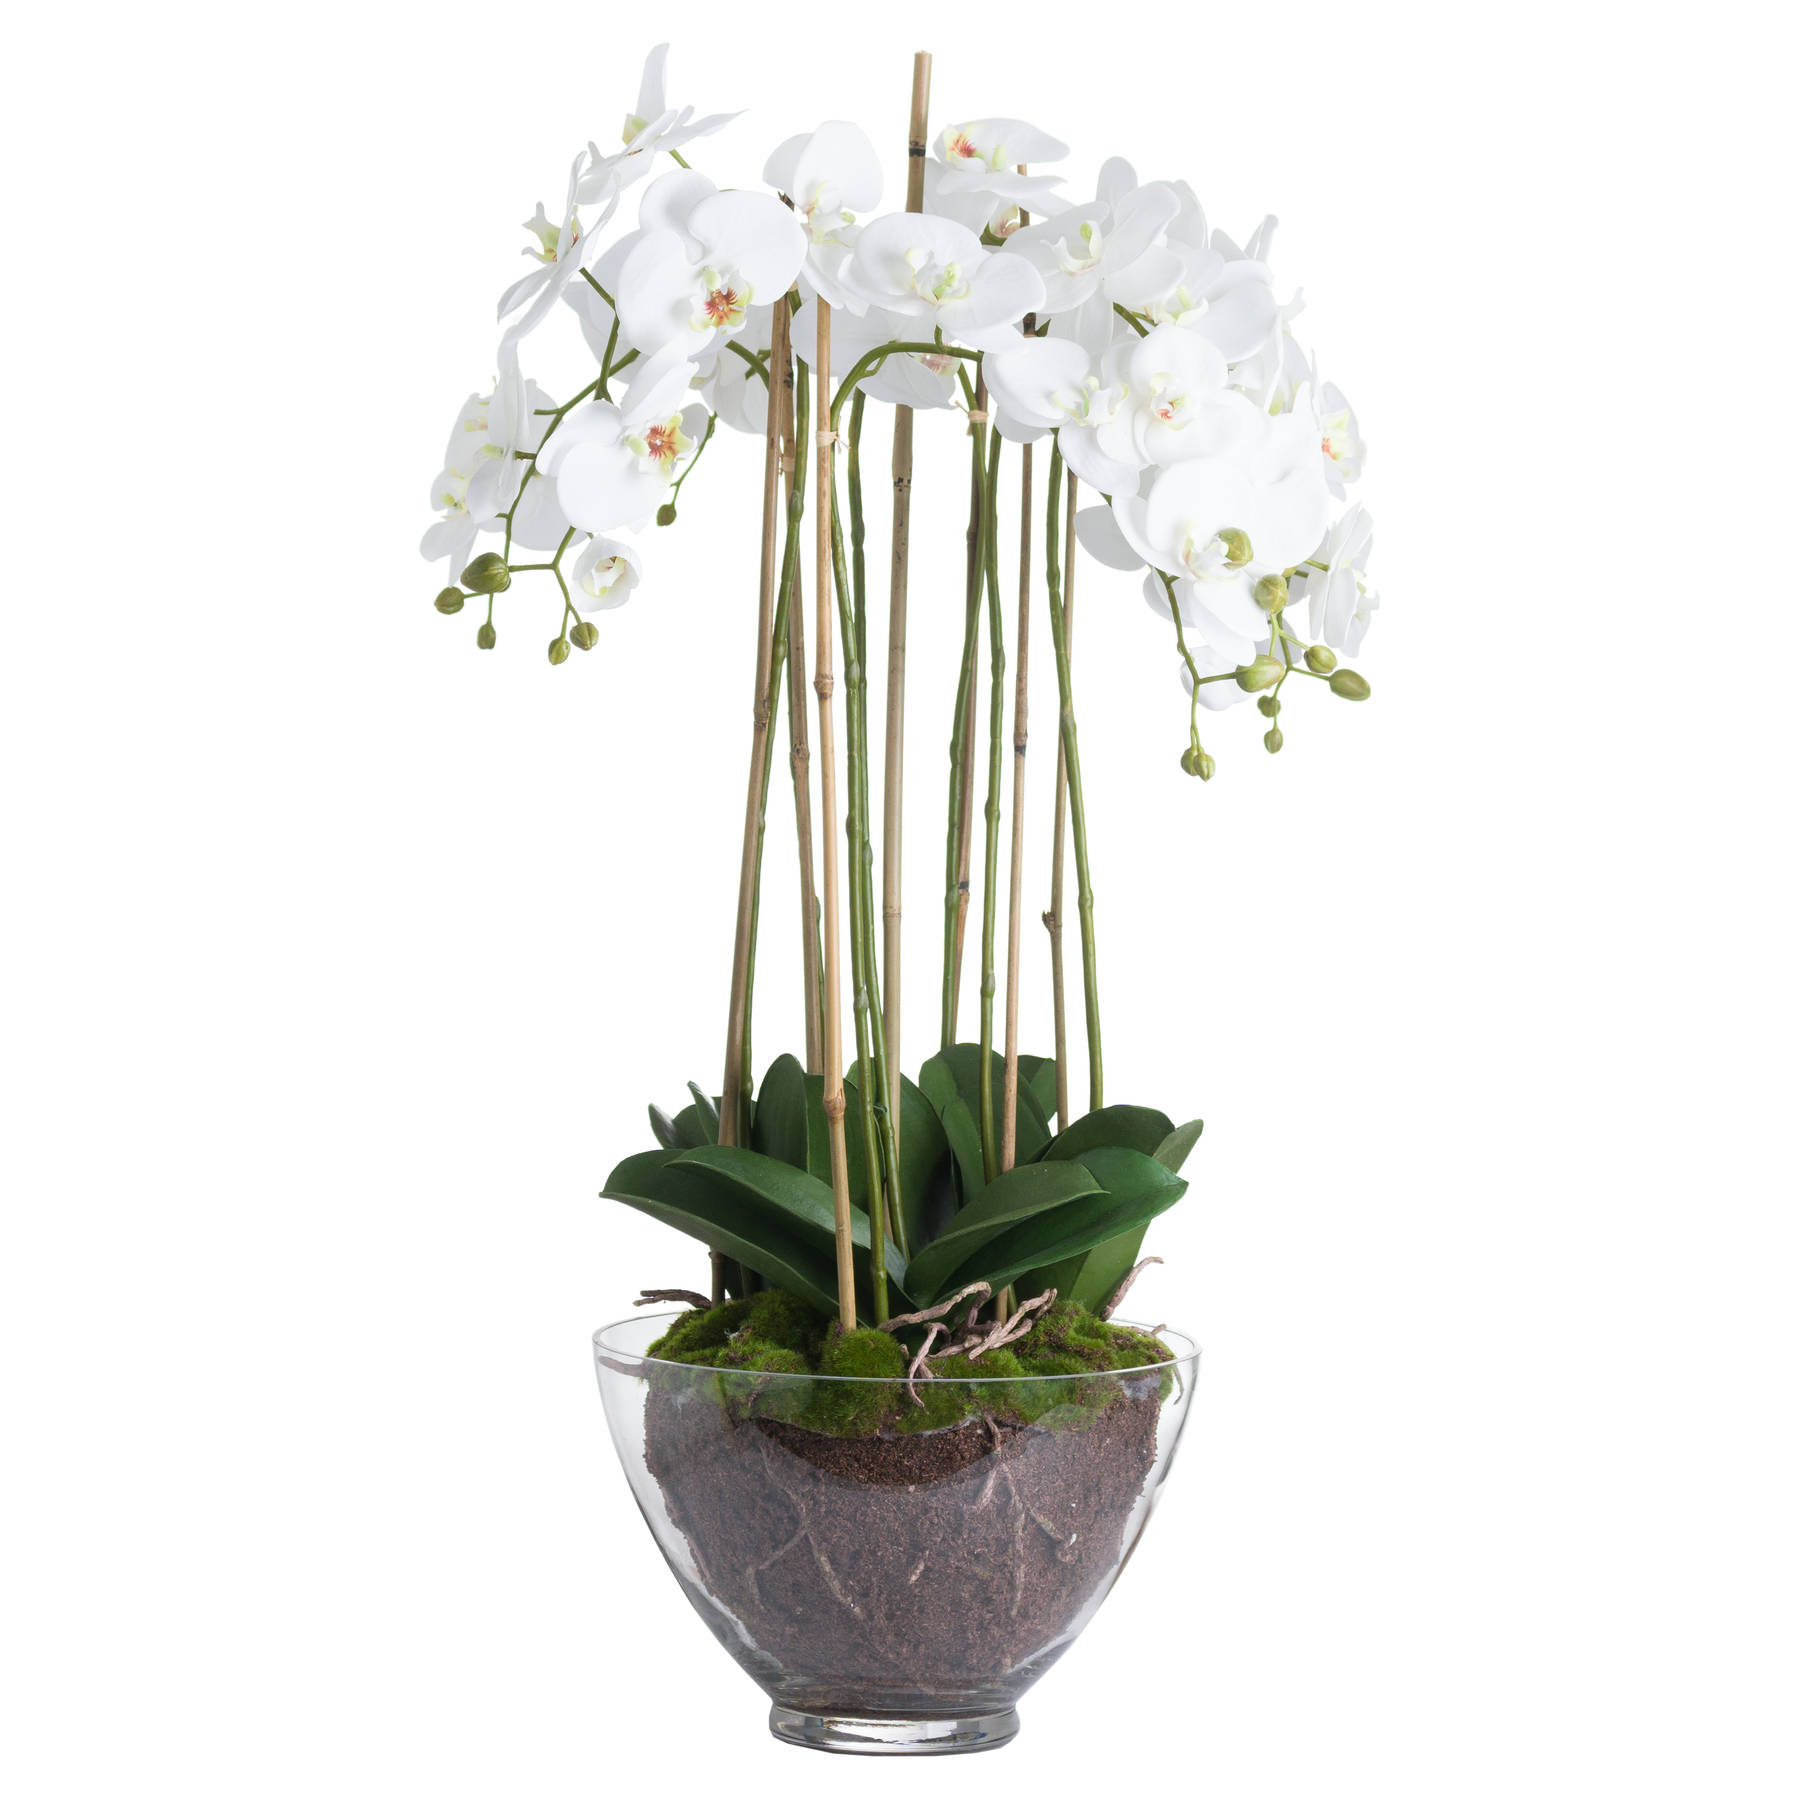 Large White Orchid In Glass Pot - Image 2